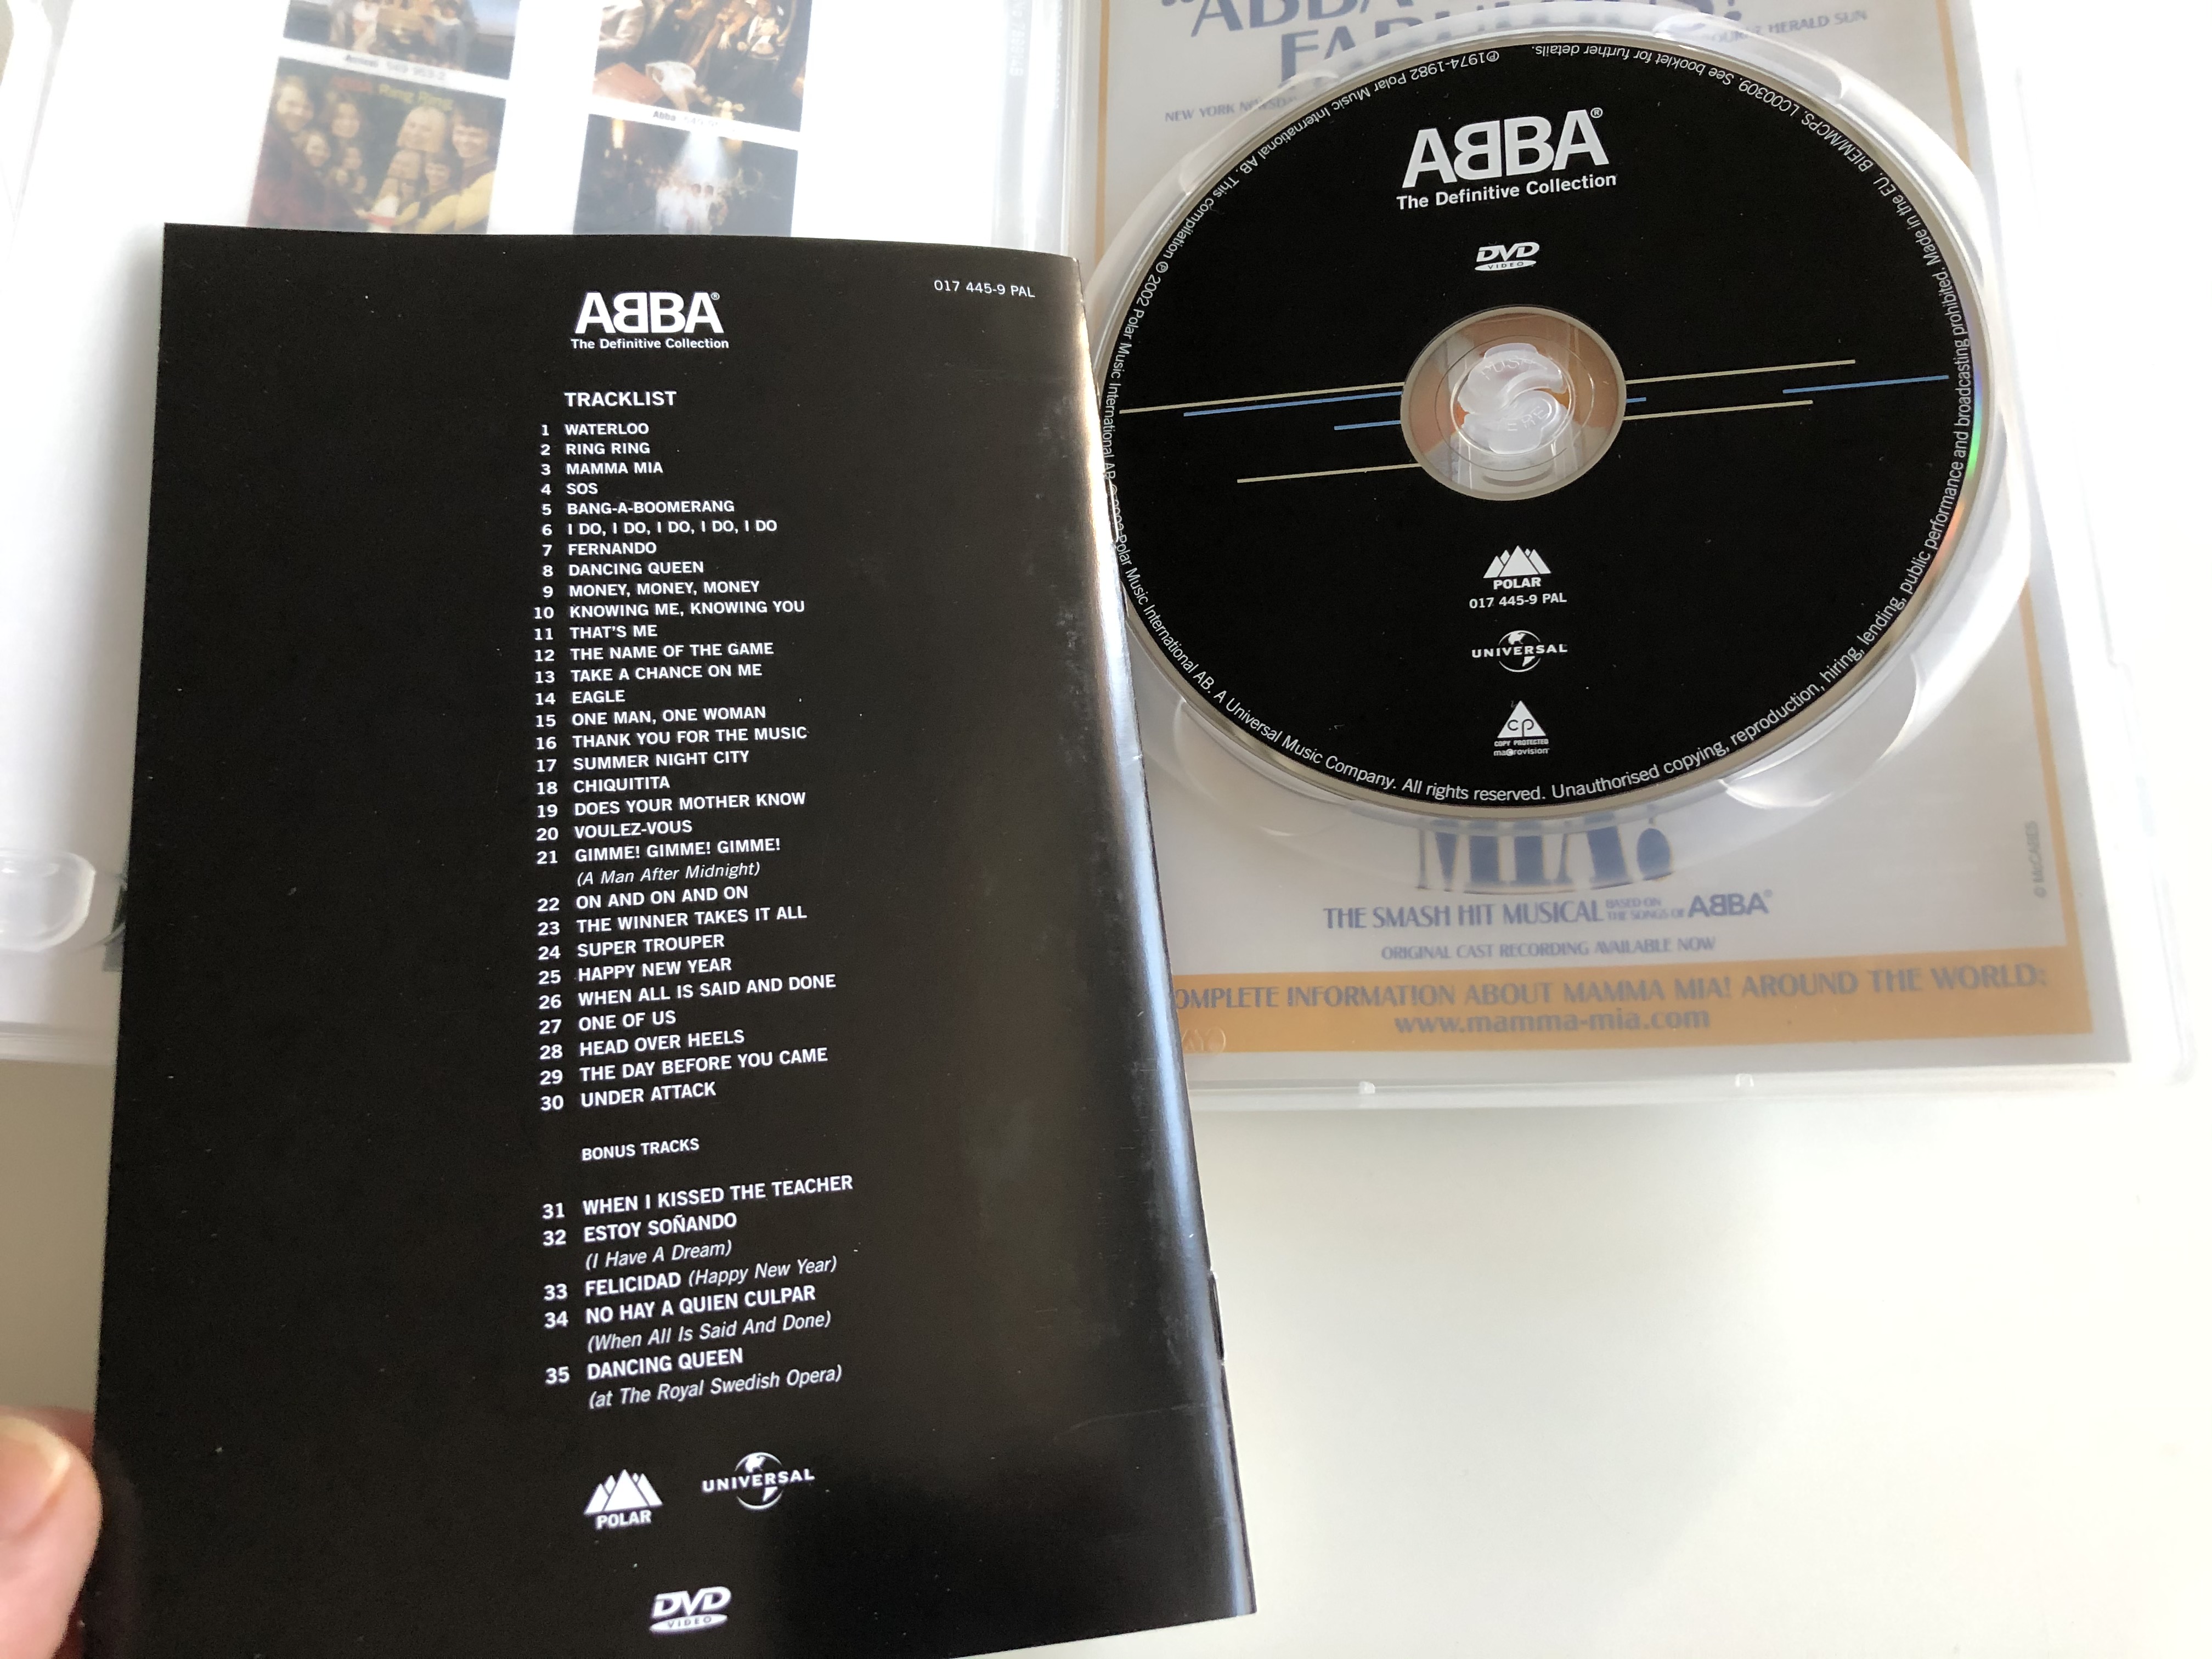 abba-the-definitive-collection-dvd-2002-includes-all-30-videos-restored-and-remastered-13.jpg